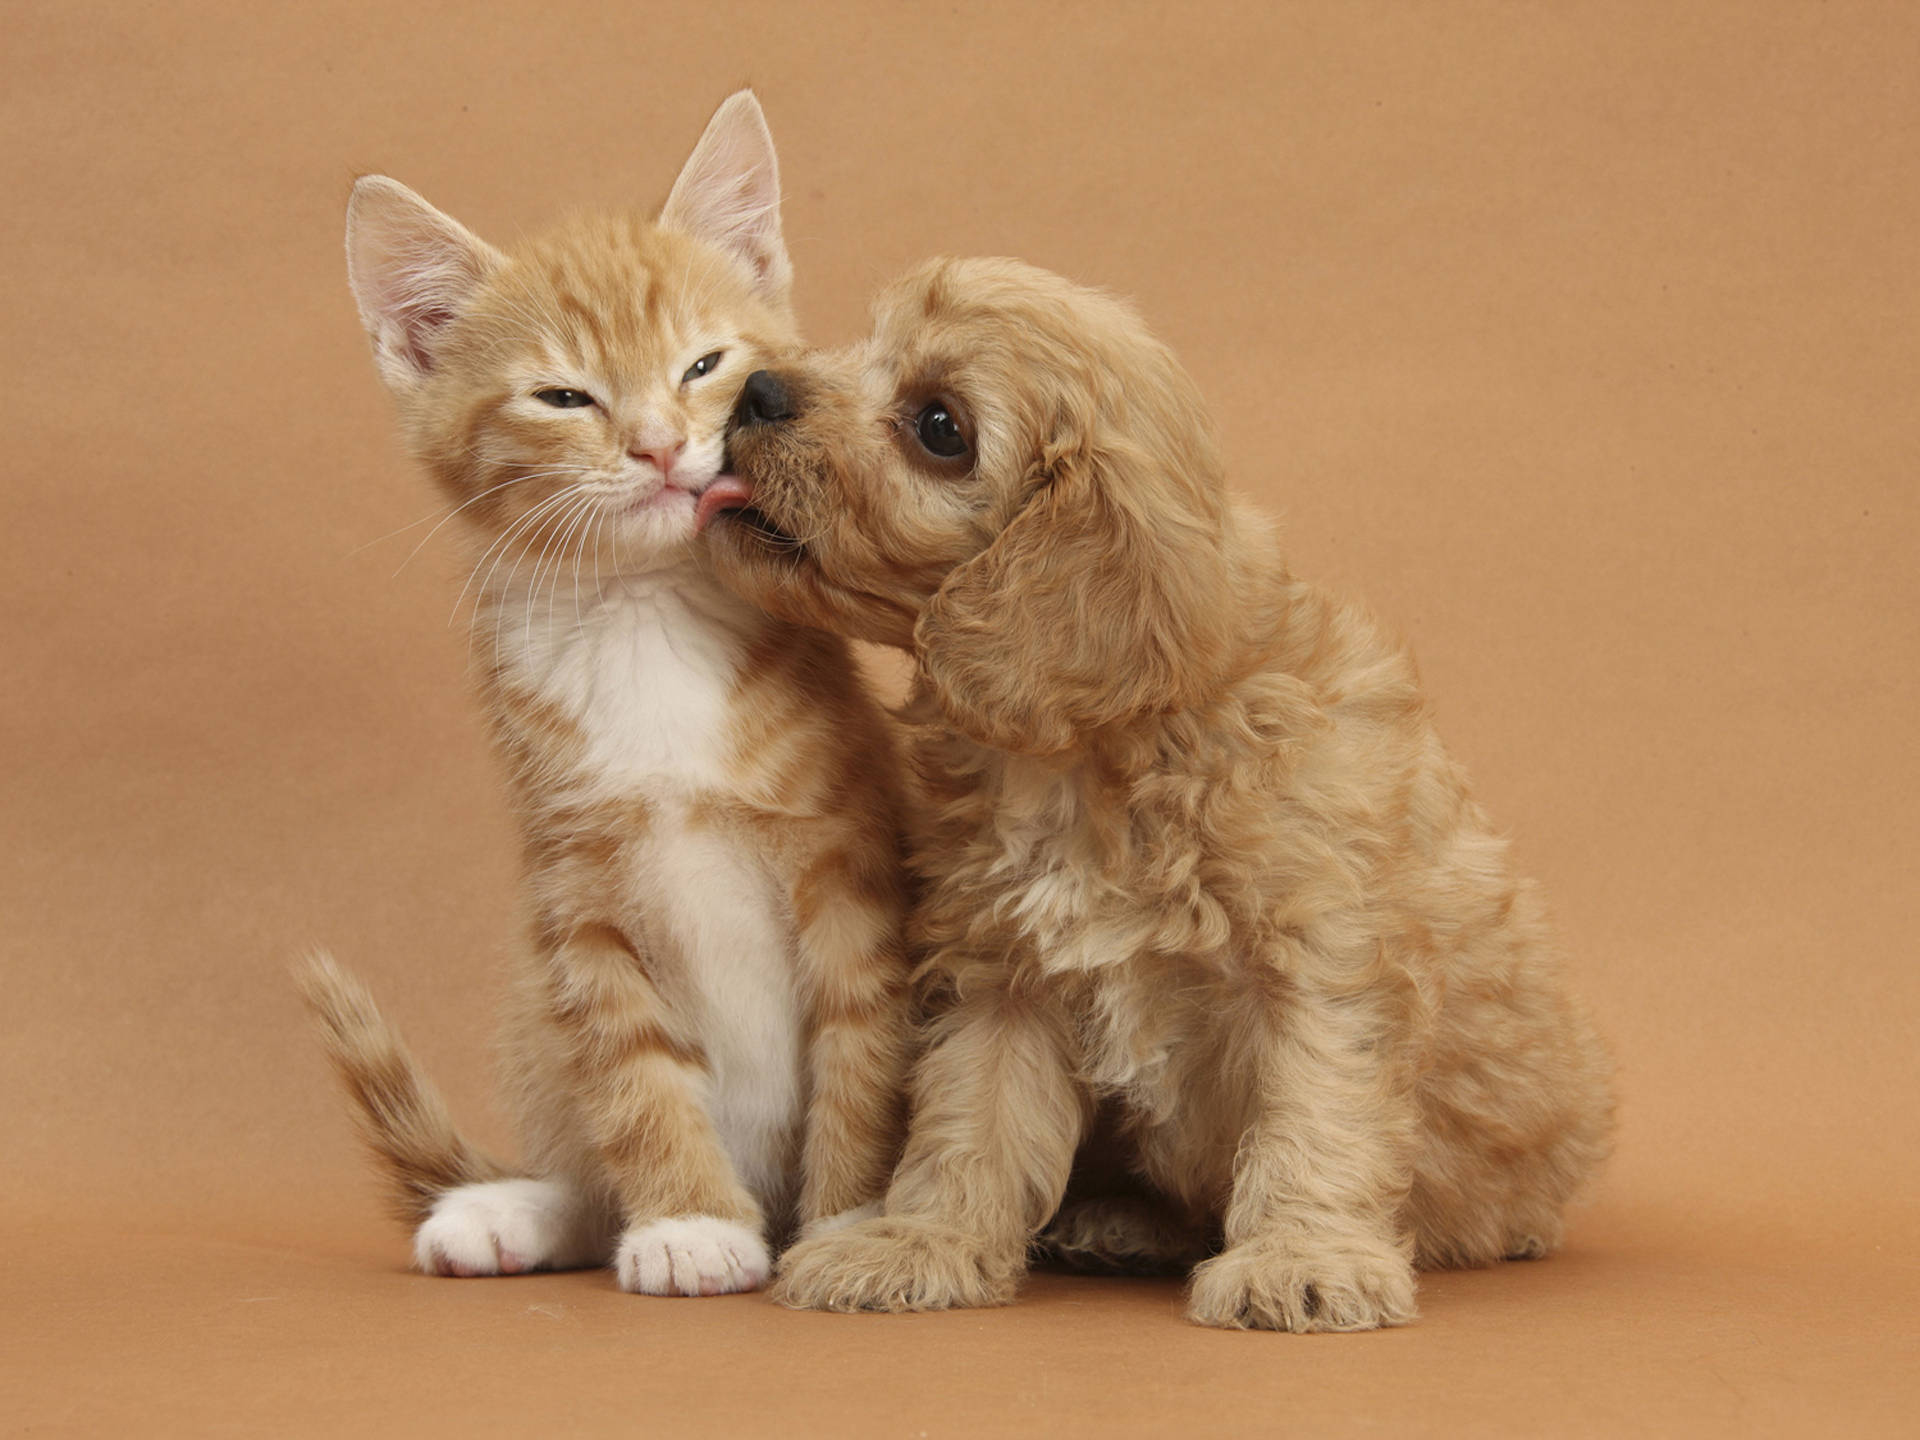 A Dog And Cat Sharing A Sweet Moment Background